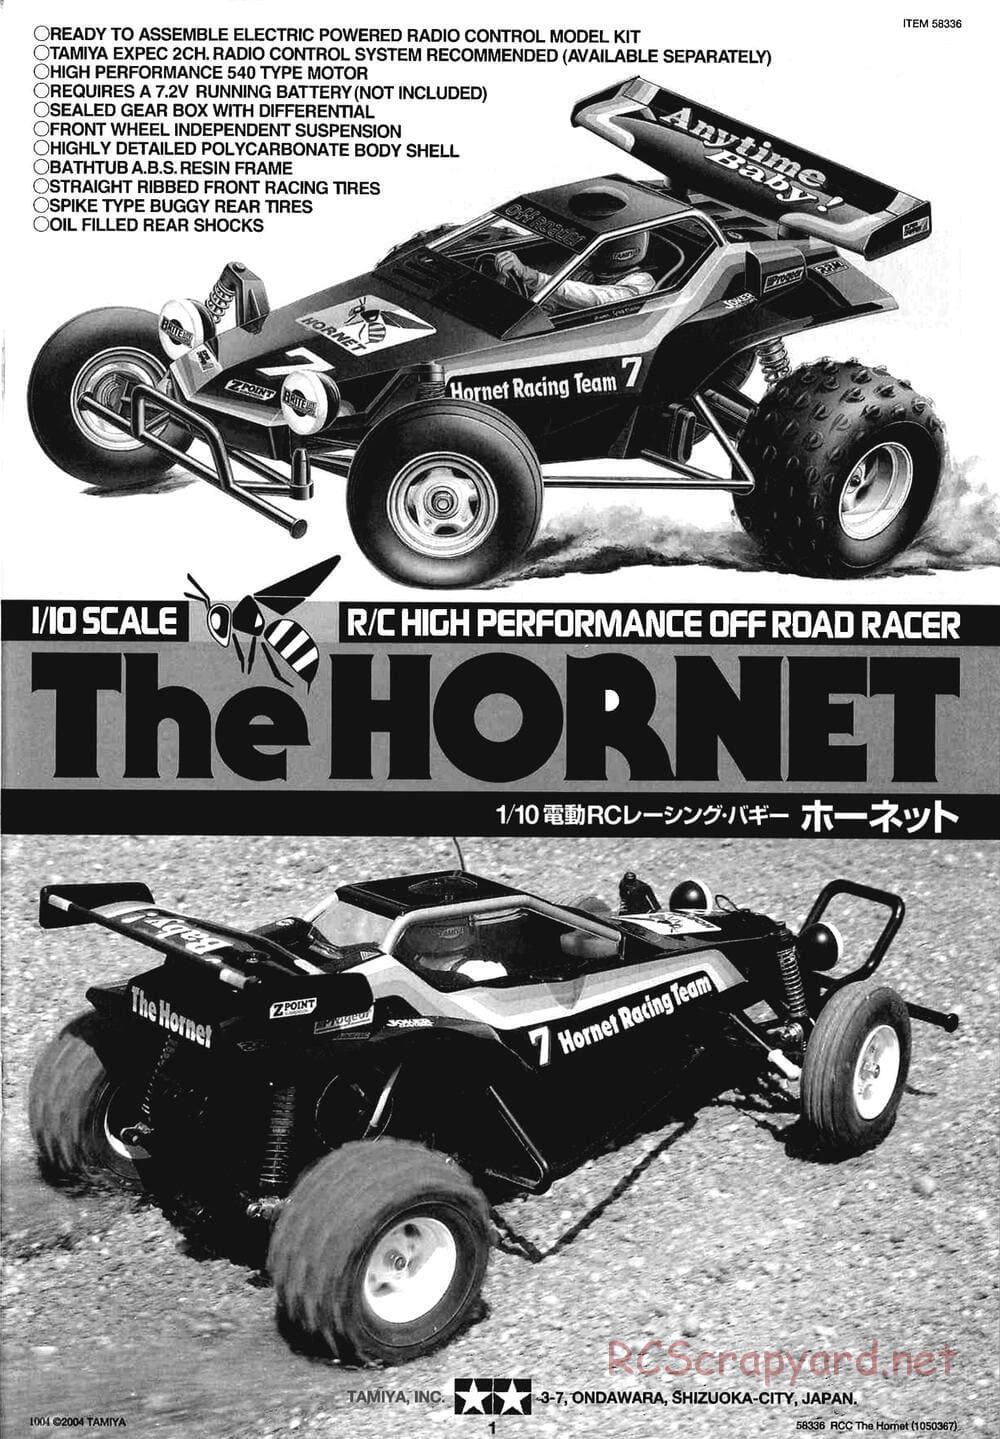 Tamiya - The Hornet (2004) - GH Chassis - Manual - Page 1